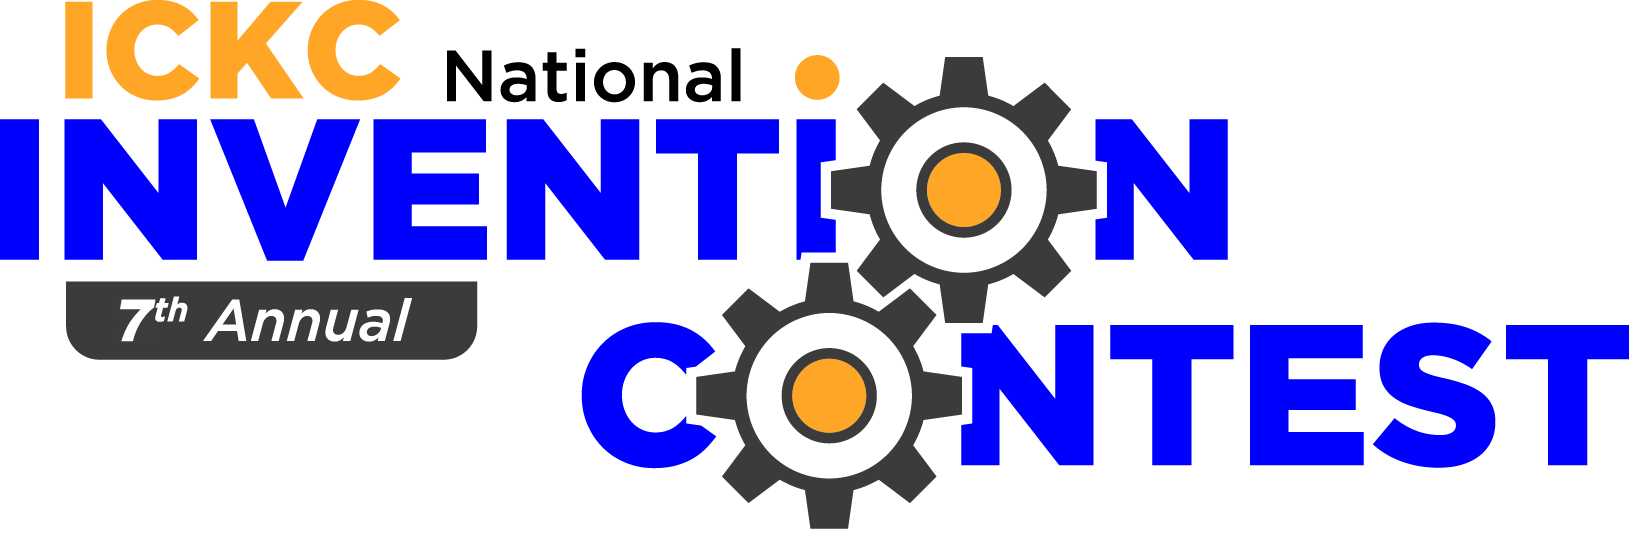 7th Annual Invention Contest hosted by ICKC